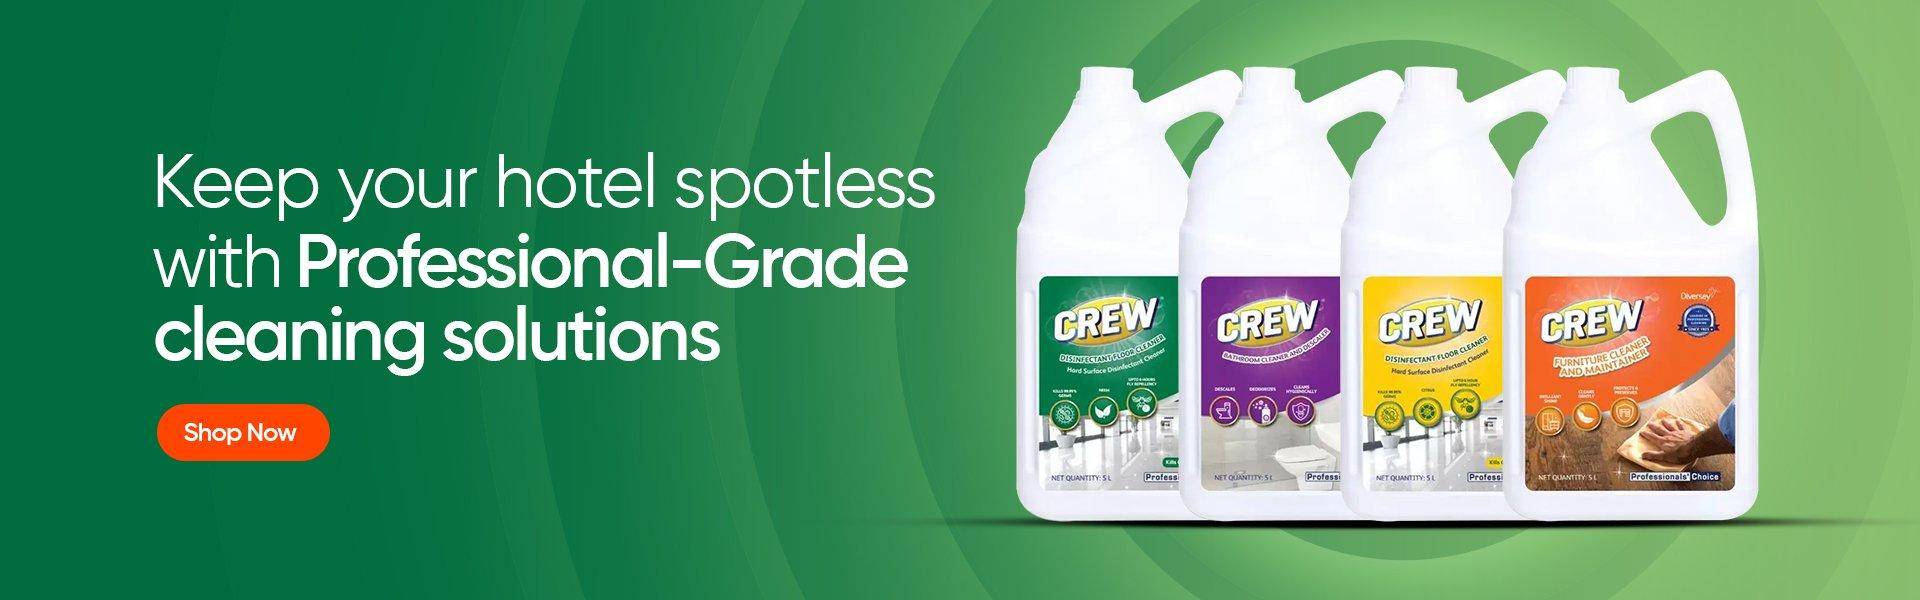 Professional cleaning chemicals for spotless hotel properties